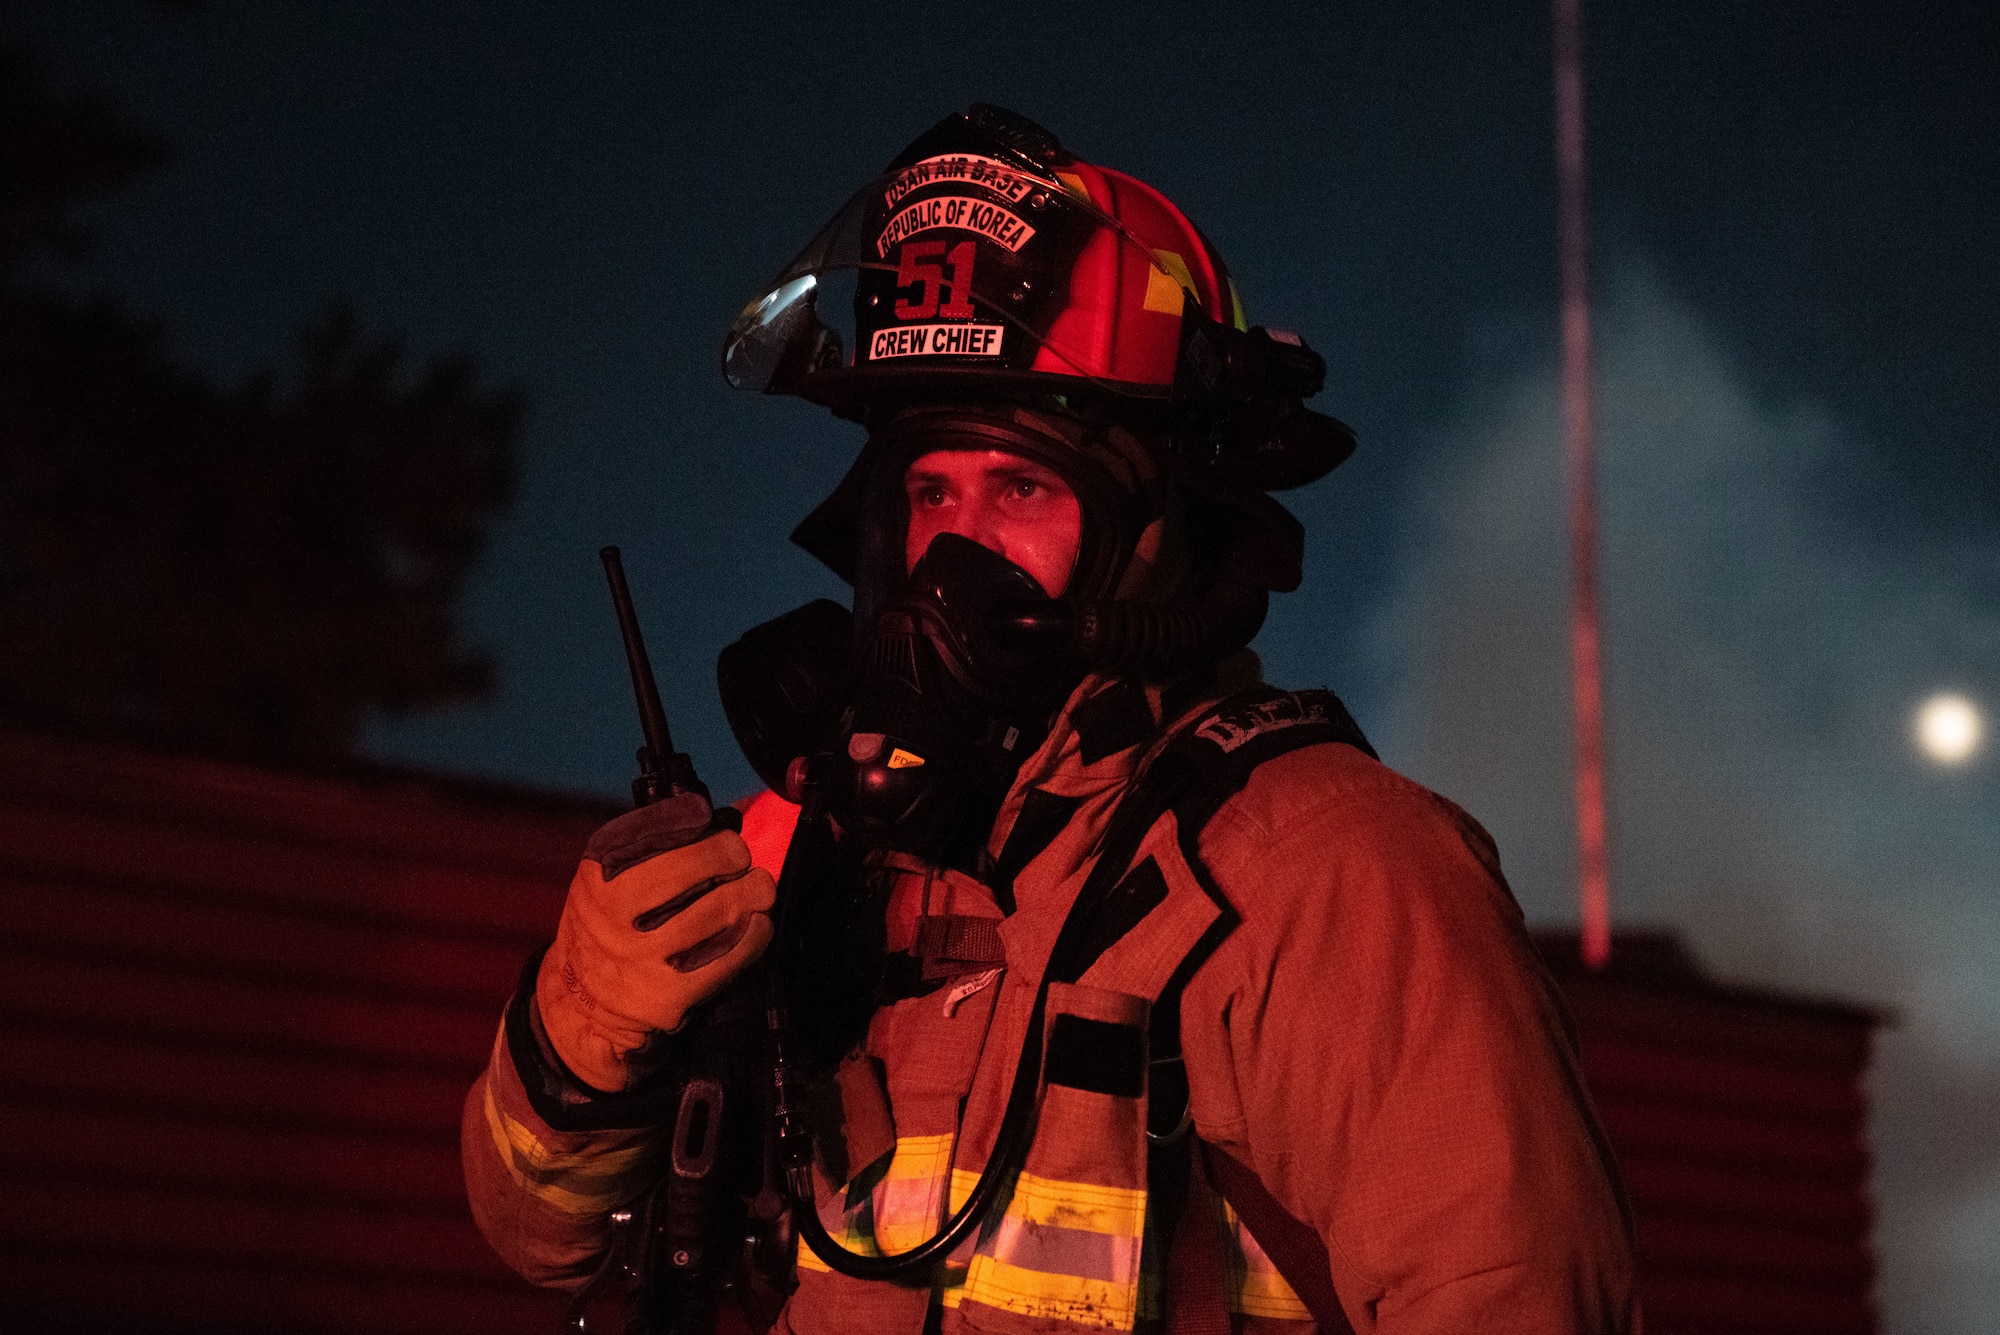 U.S. Air Force Staff Sgt. Benny Bowen, 51st Civil Engineer Squadron lead firefighter, responds to radio traffic during a fire response scenario at Osan Air Base, Republic of Korea, Sept. 12, 2022, in support of a wing training event.